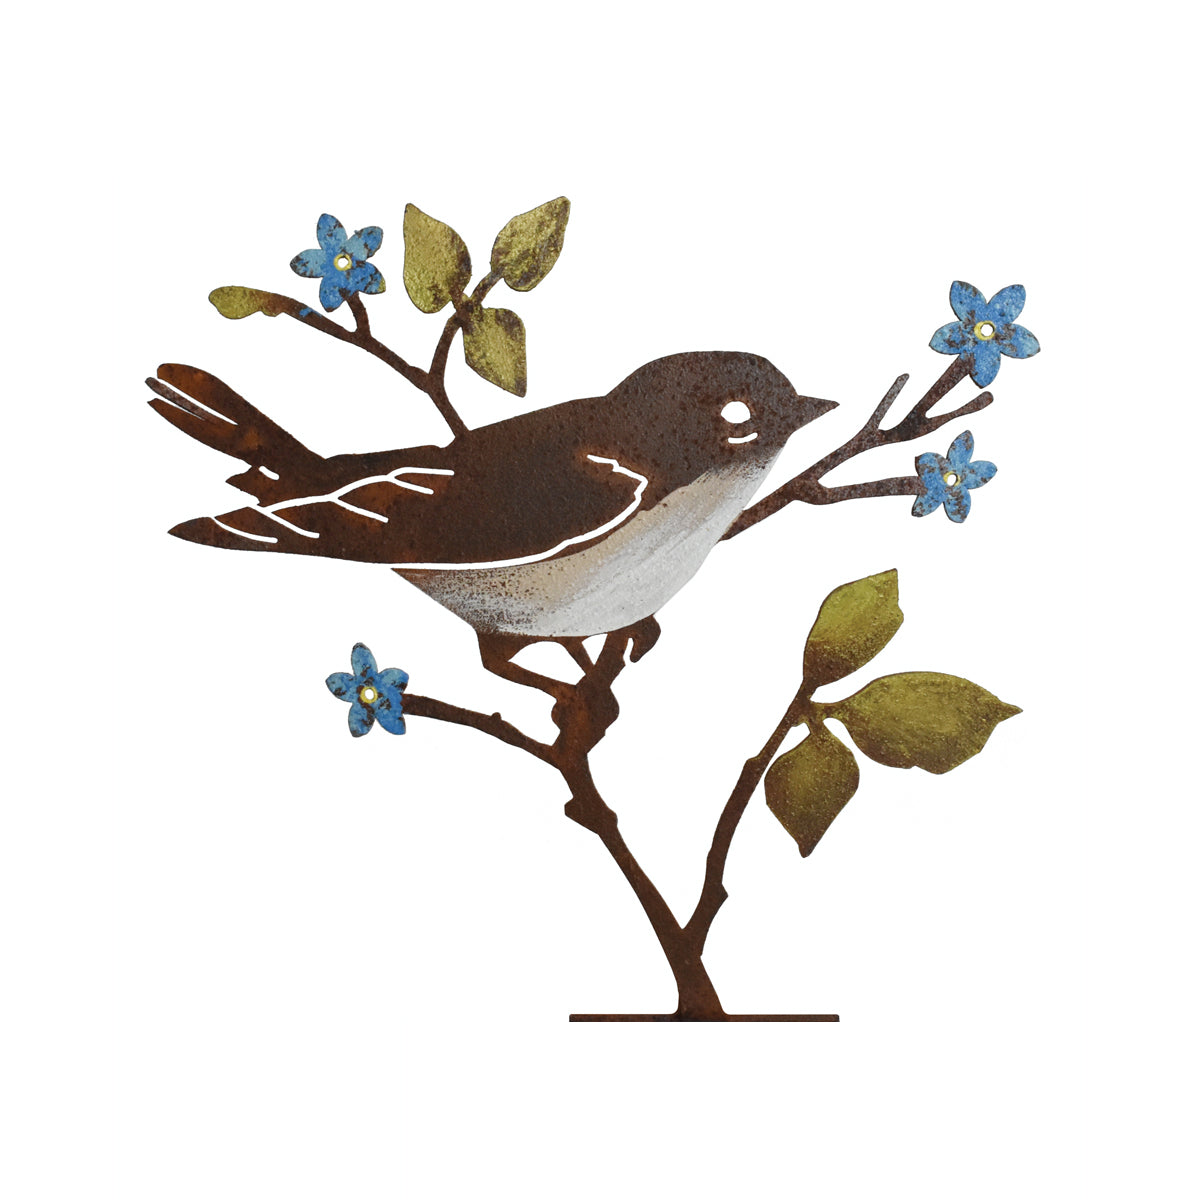 Upright Warbler with Flower - Painted